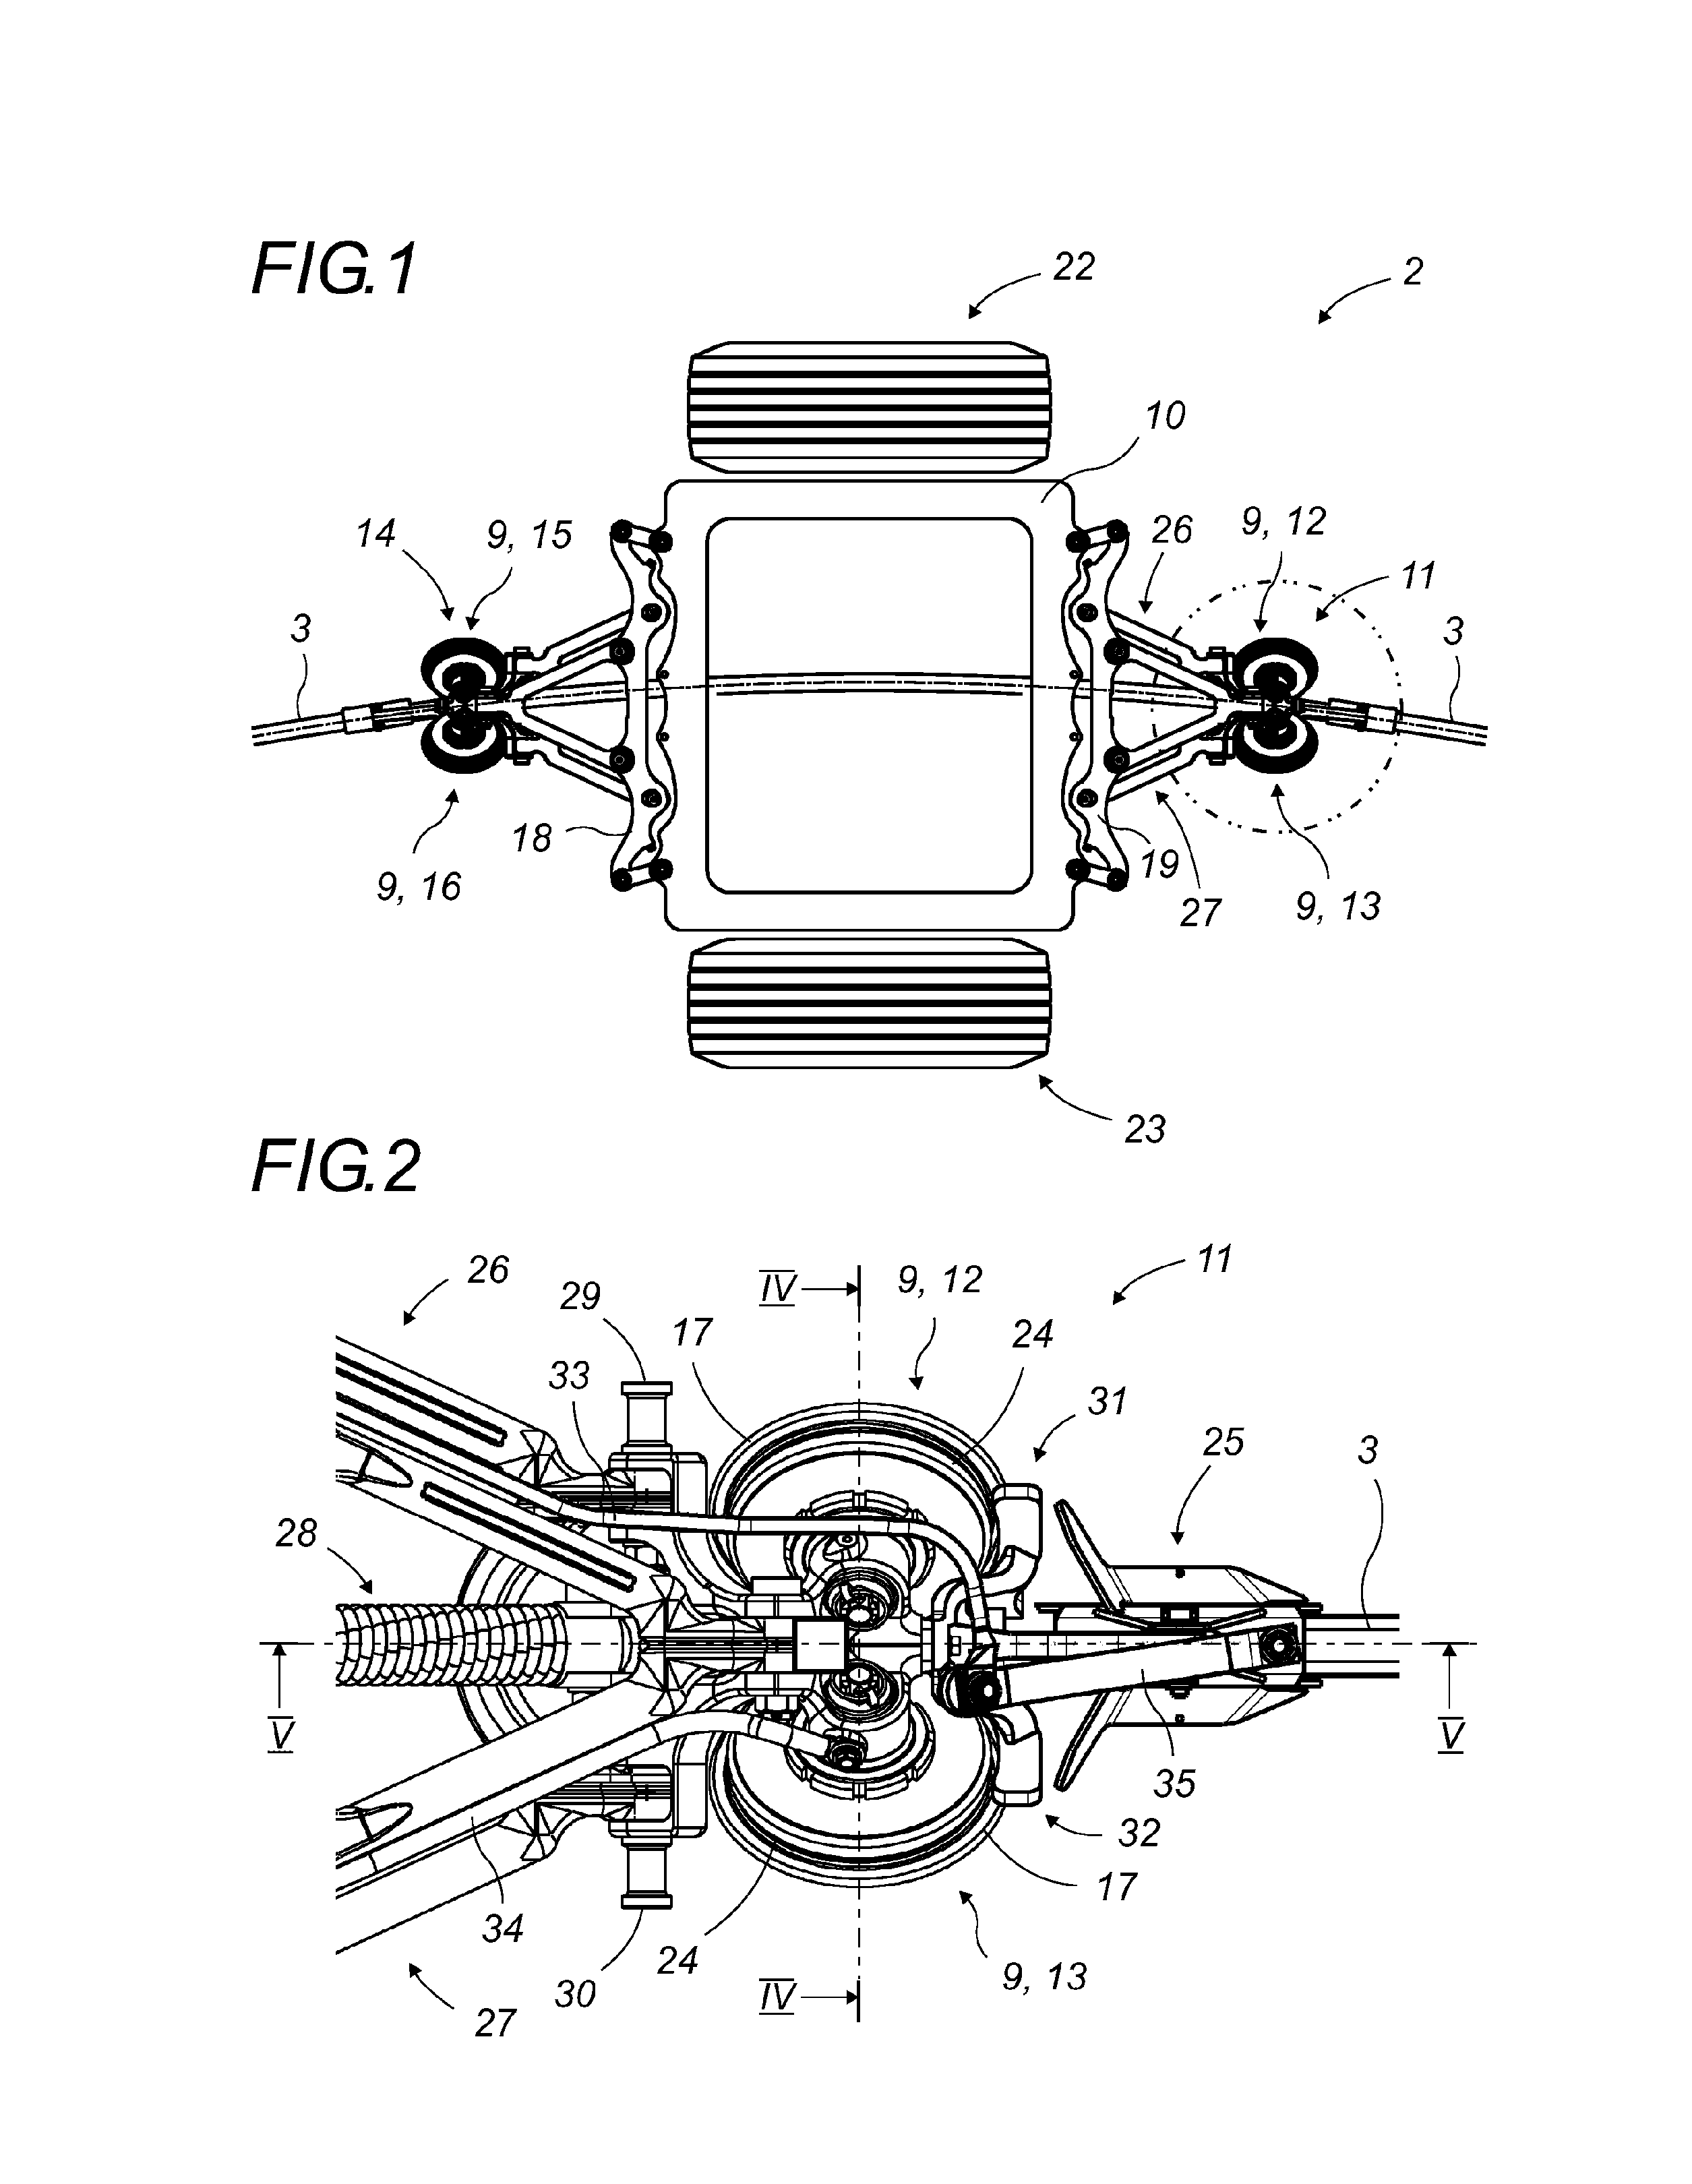 System for dynamic control of the rolling of the guide roller(s) for an assembly for guiding a vehicle along at least one rail